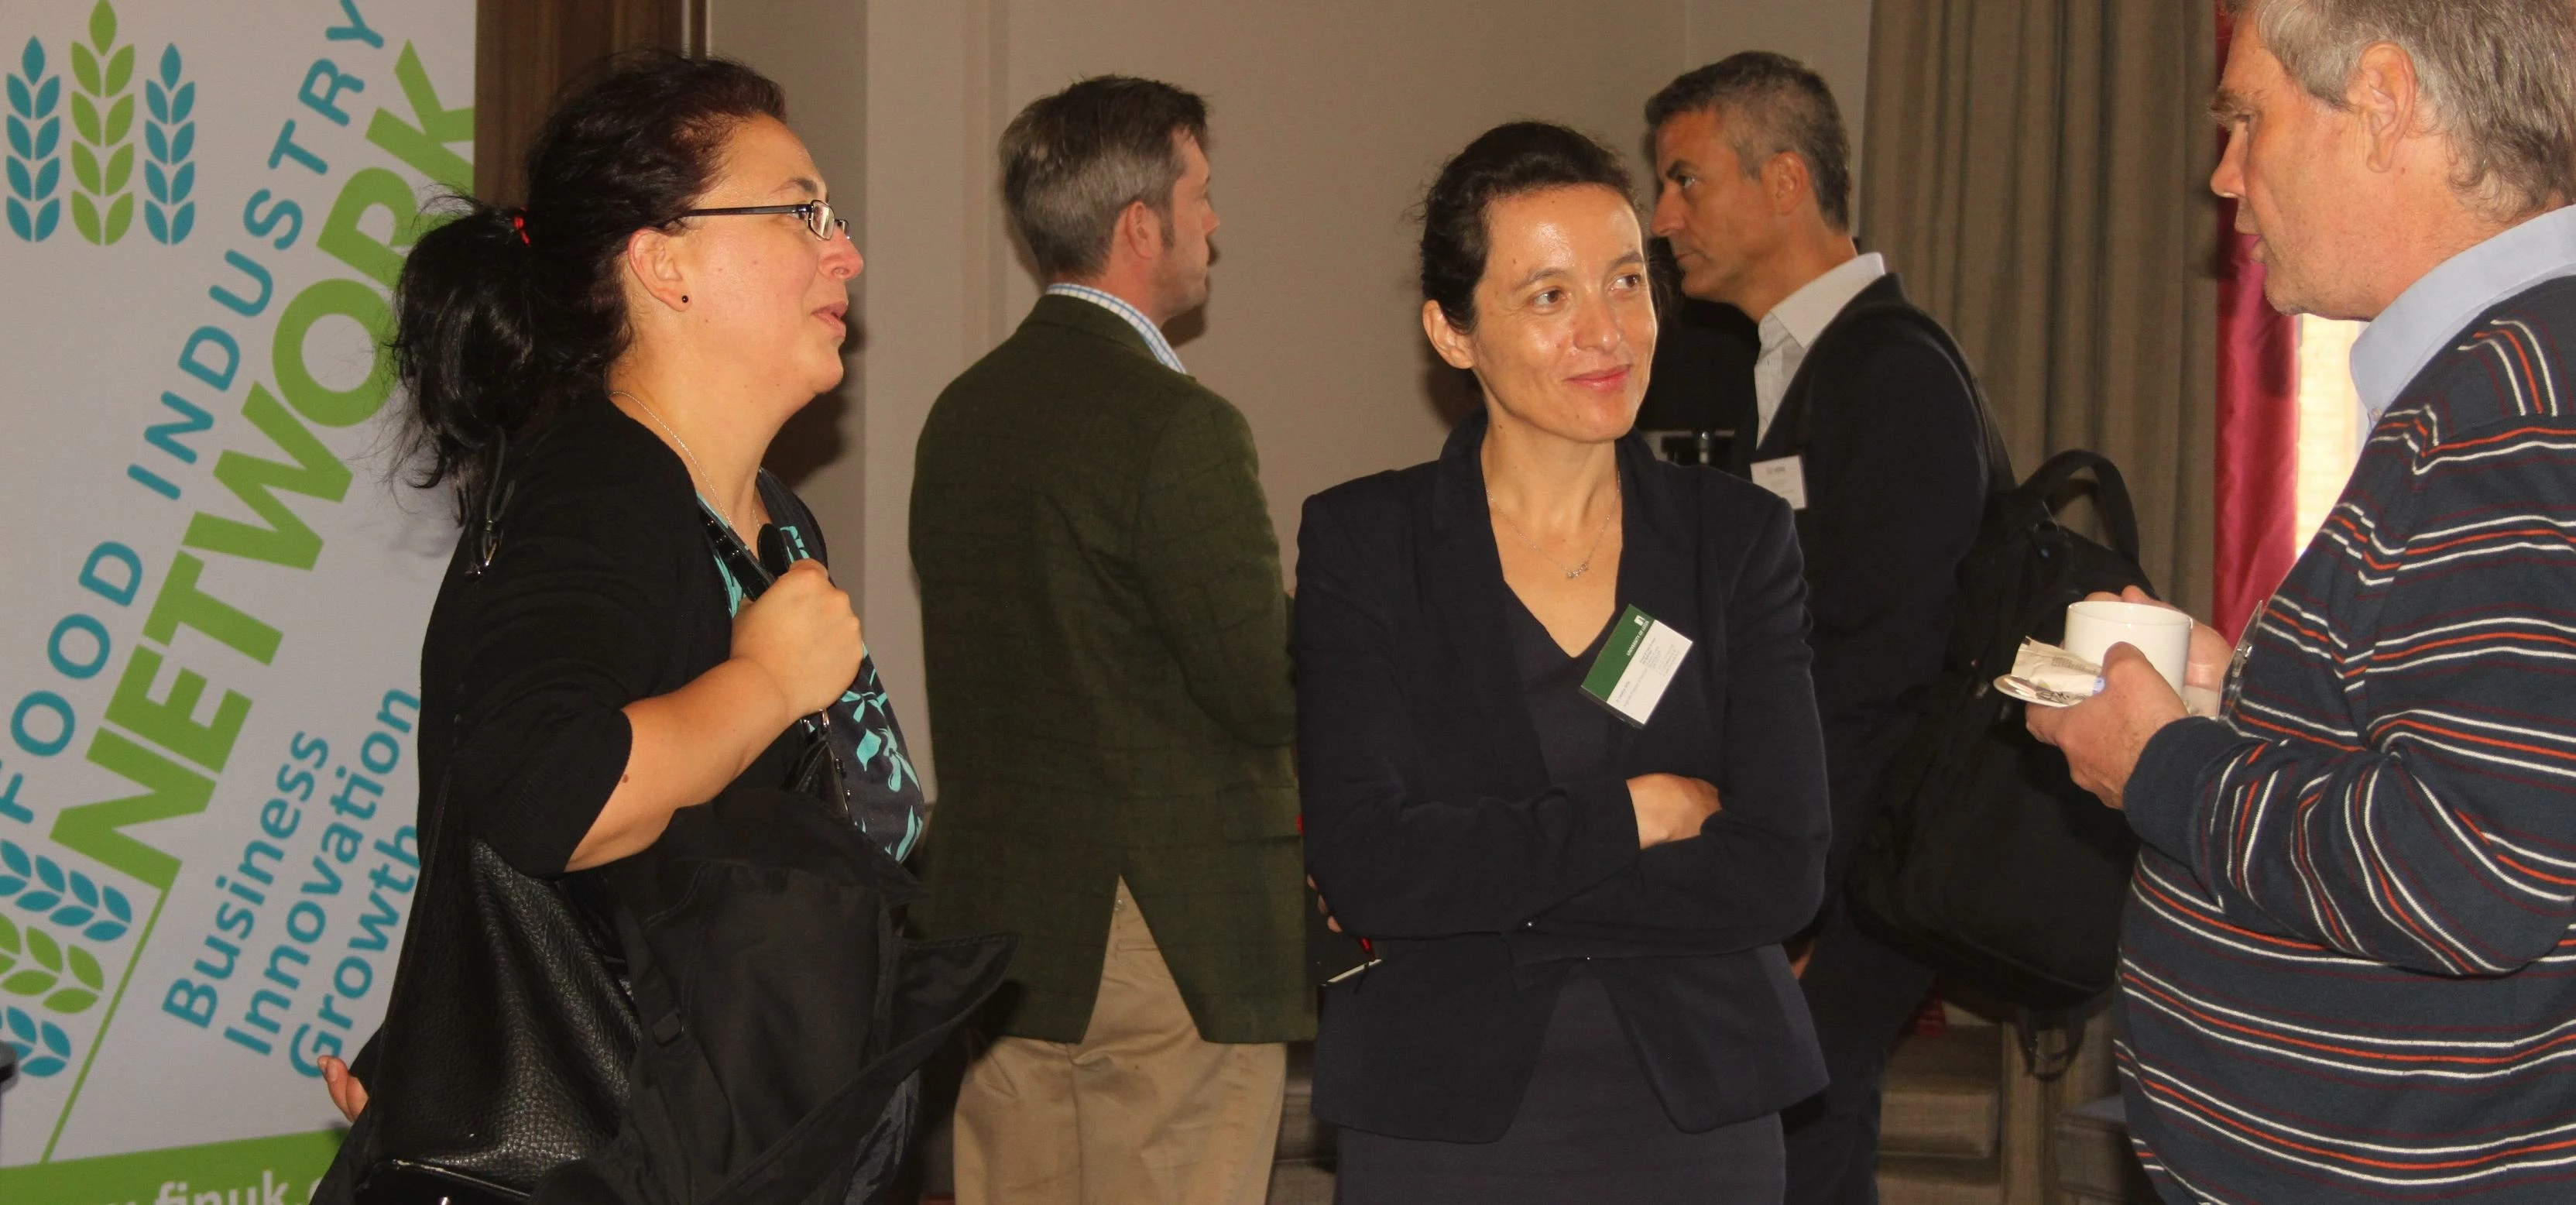 Caroline Orfila (centre) from the School of Food Science and Nutrition at the University of Leeds wi